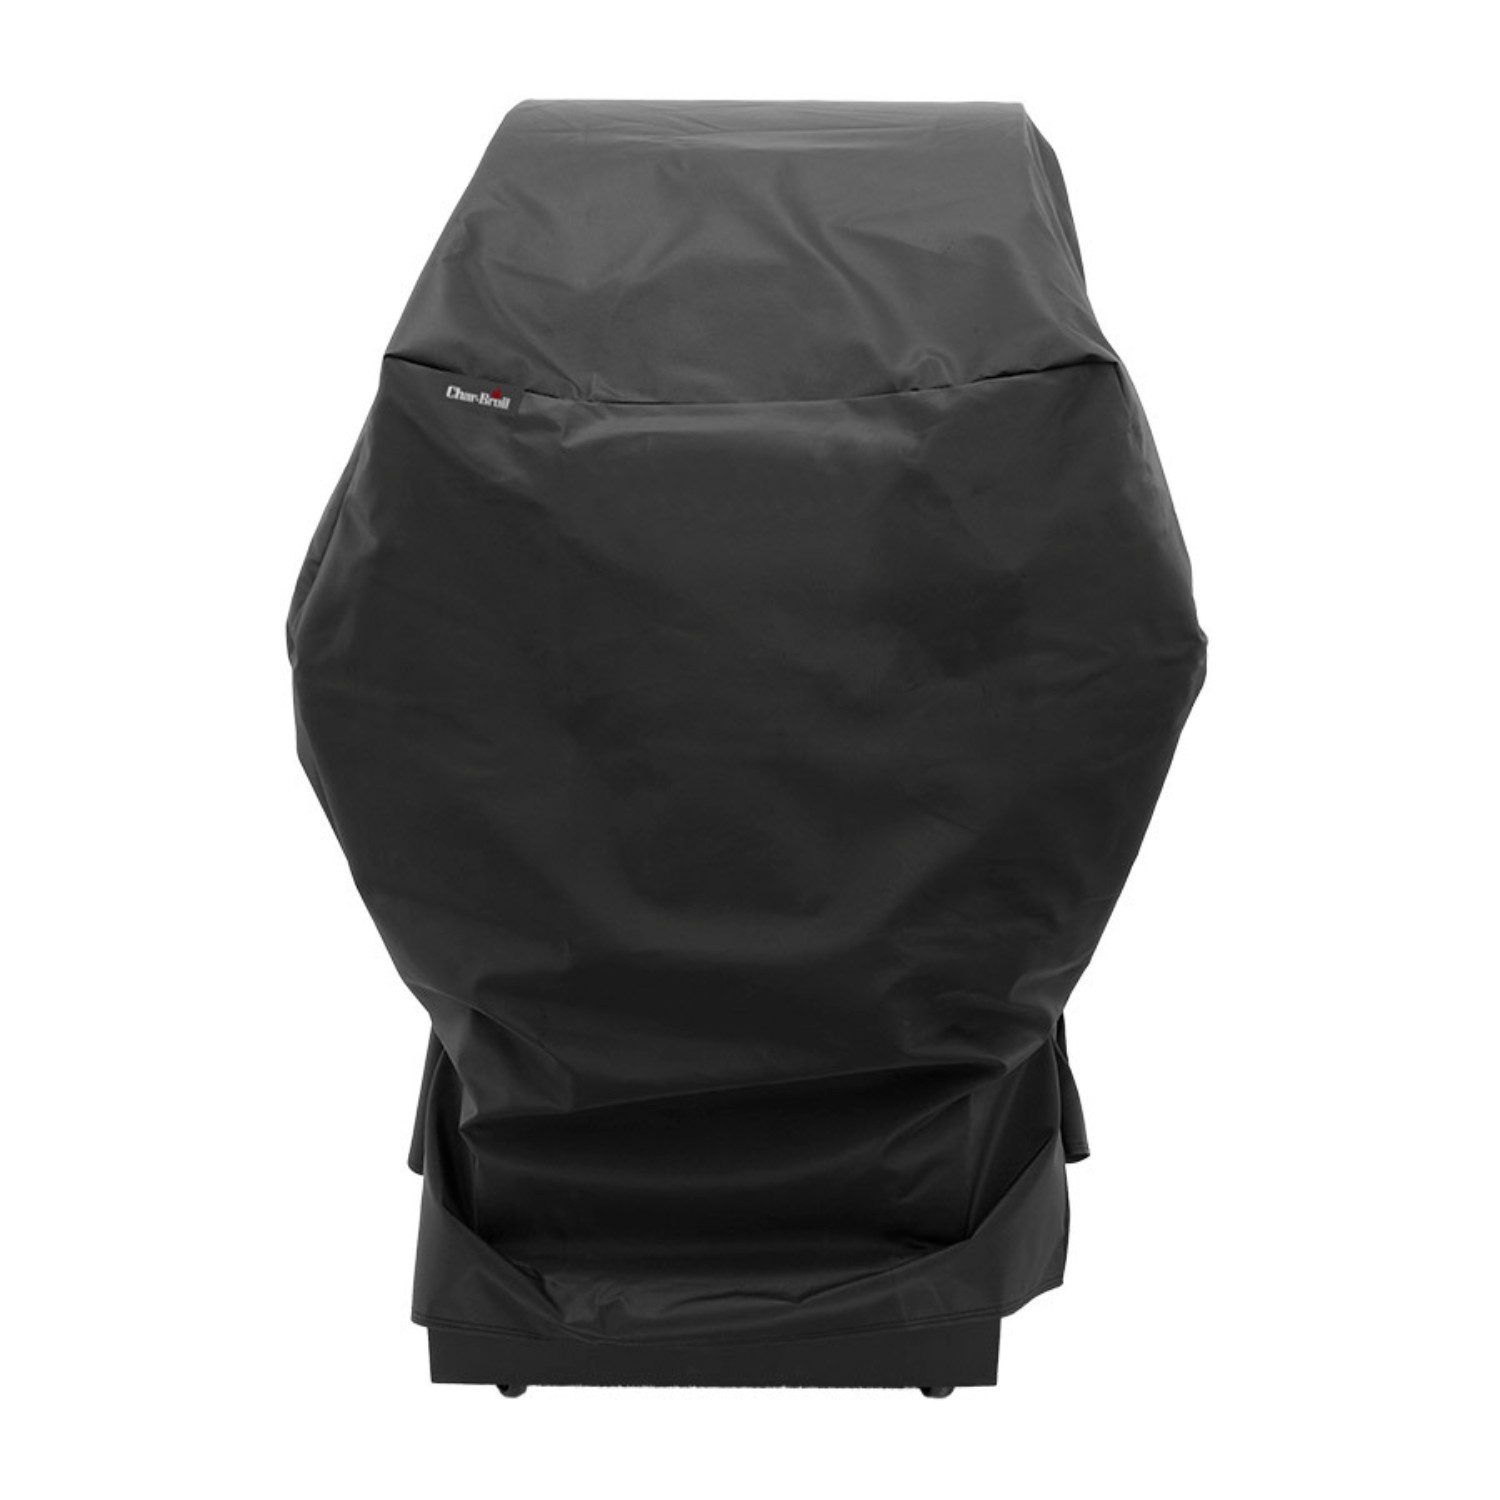 Char-Broil Small Grill and Smoker Performance Grill Cover